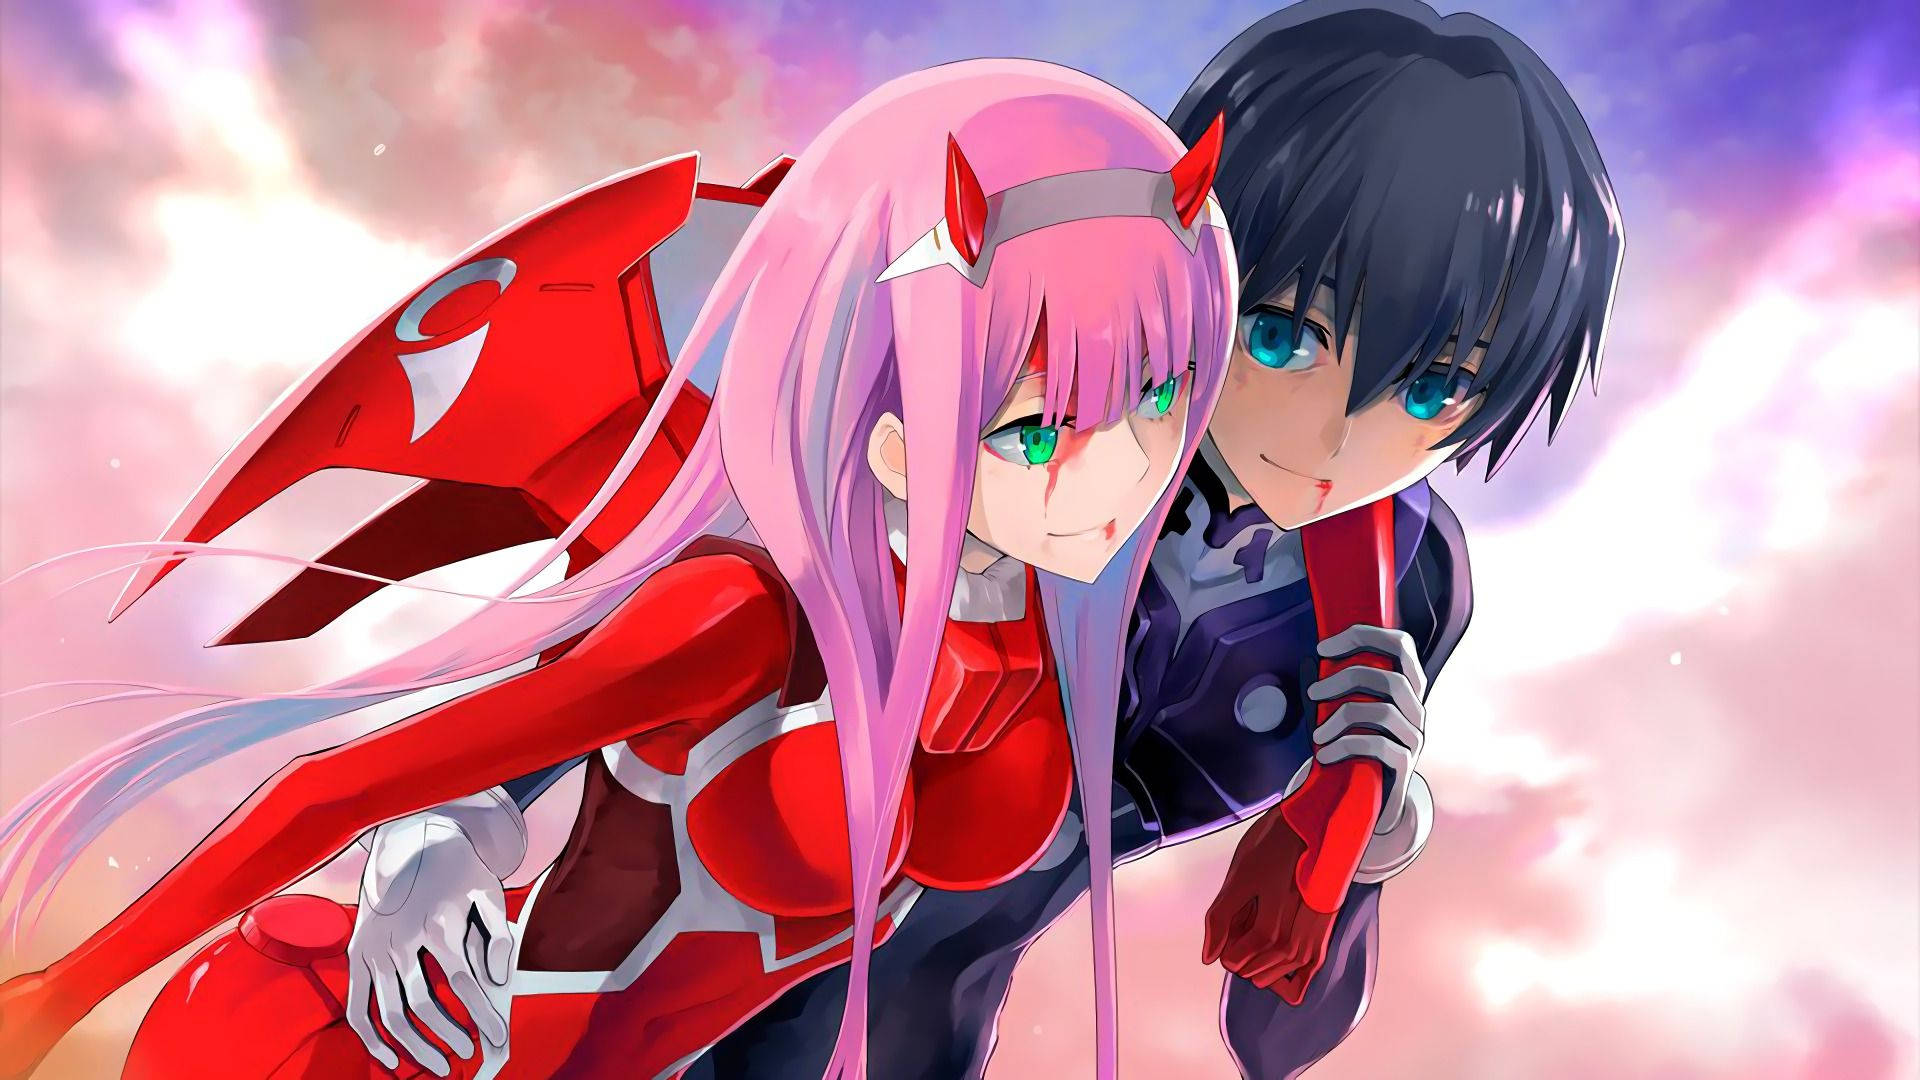 Hiro And Zero Two, Fighting For Their Love Despite The Wound. Wallpaper